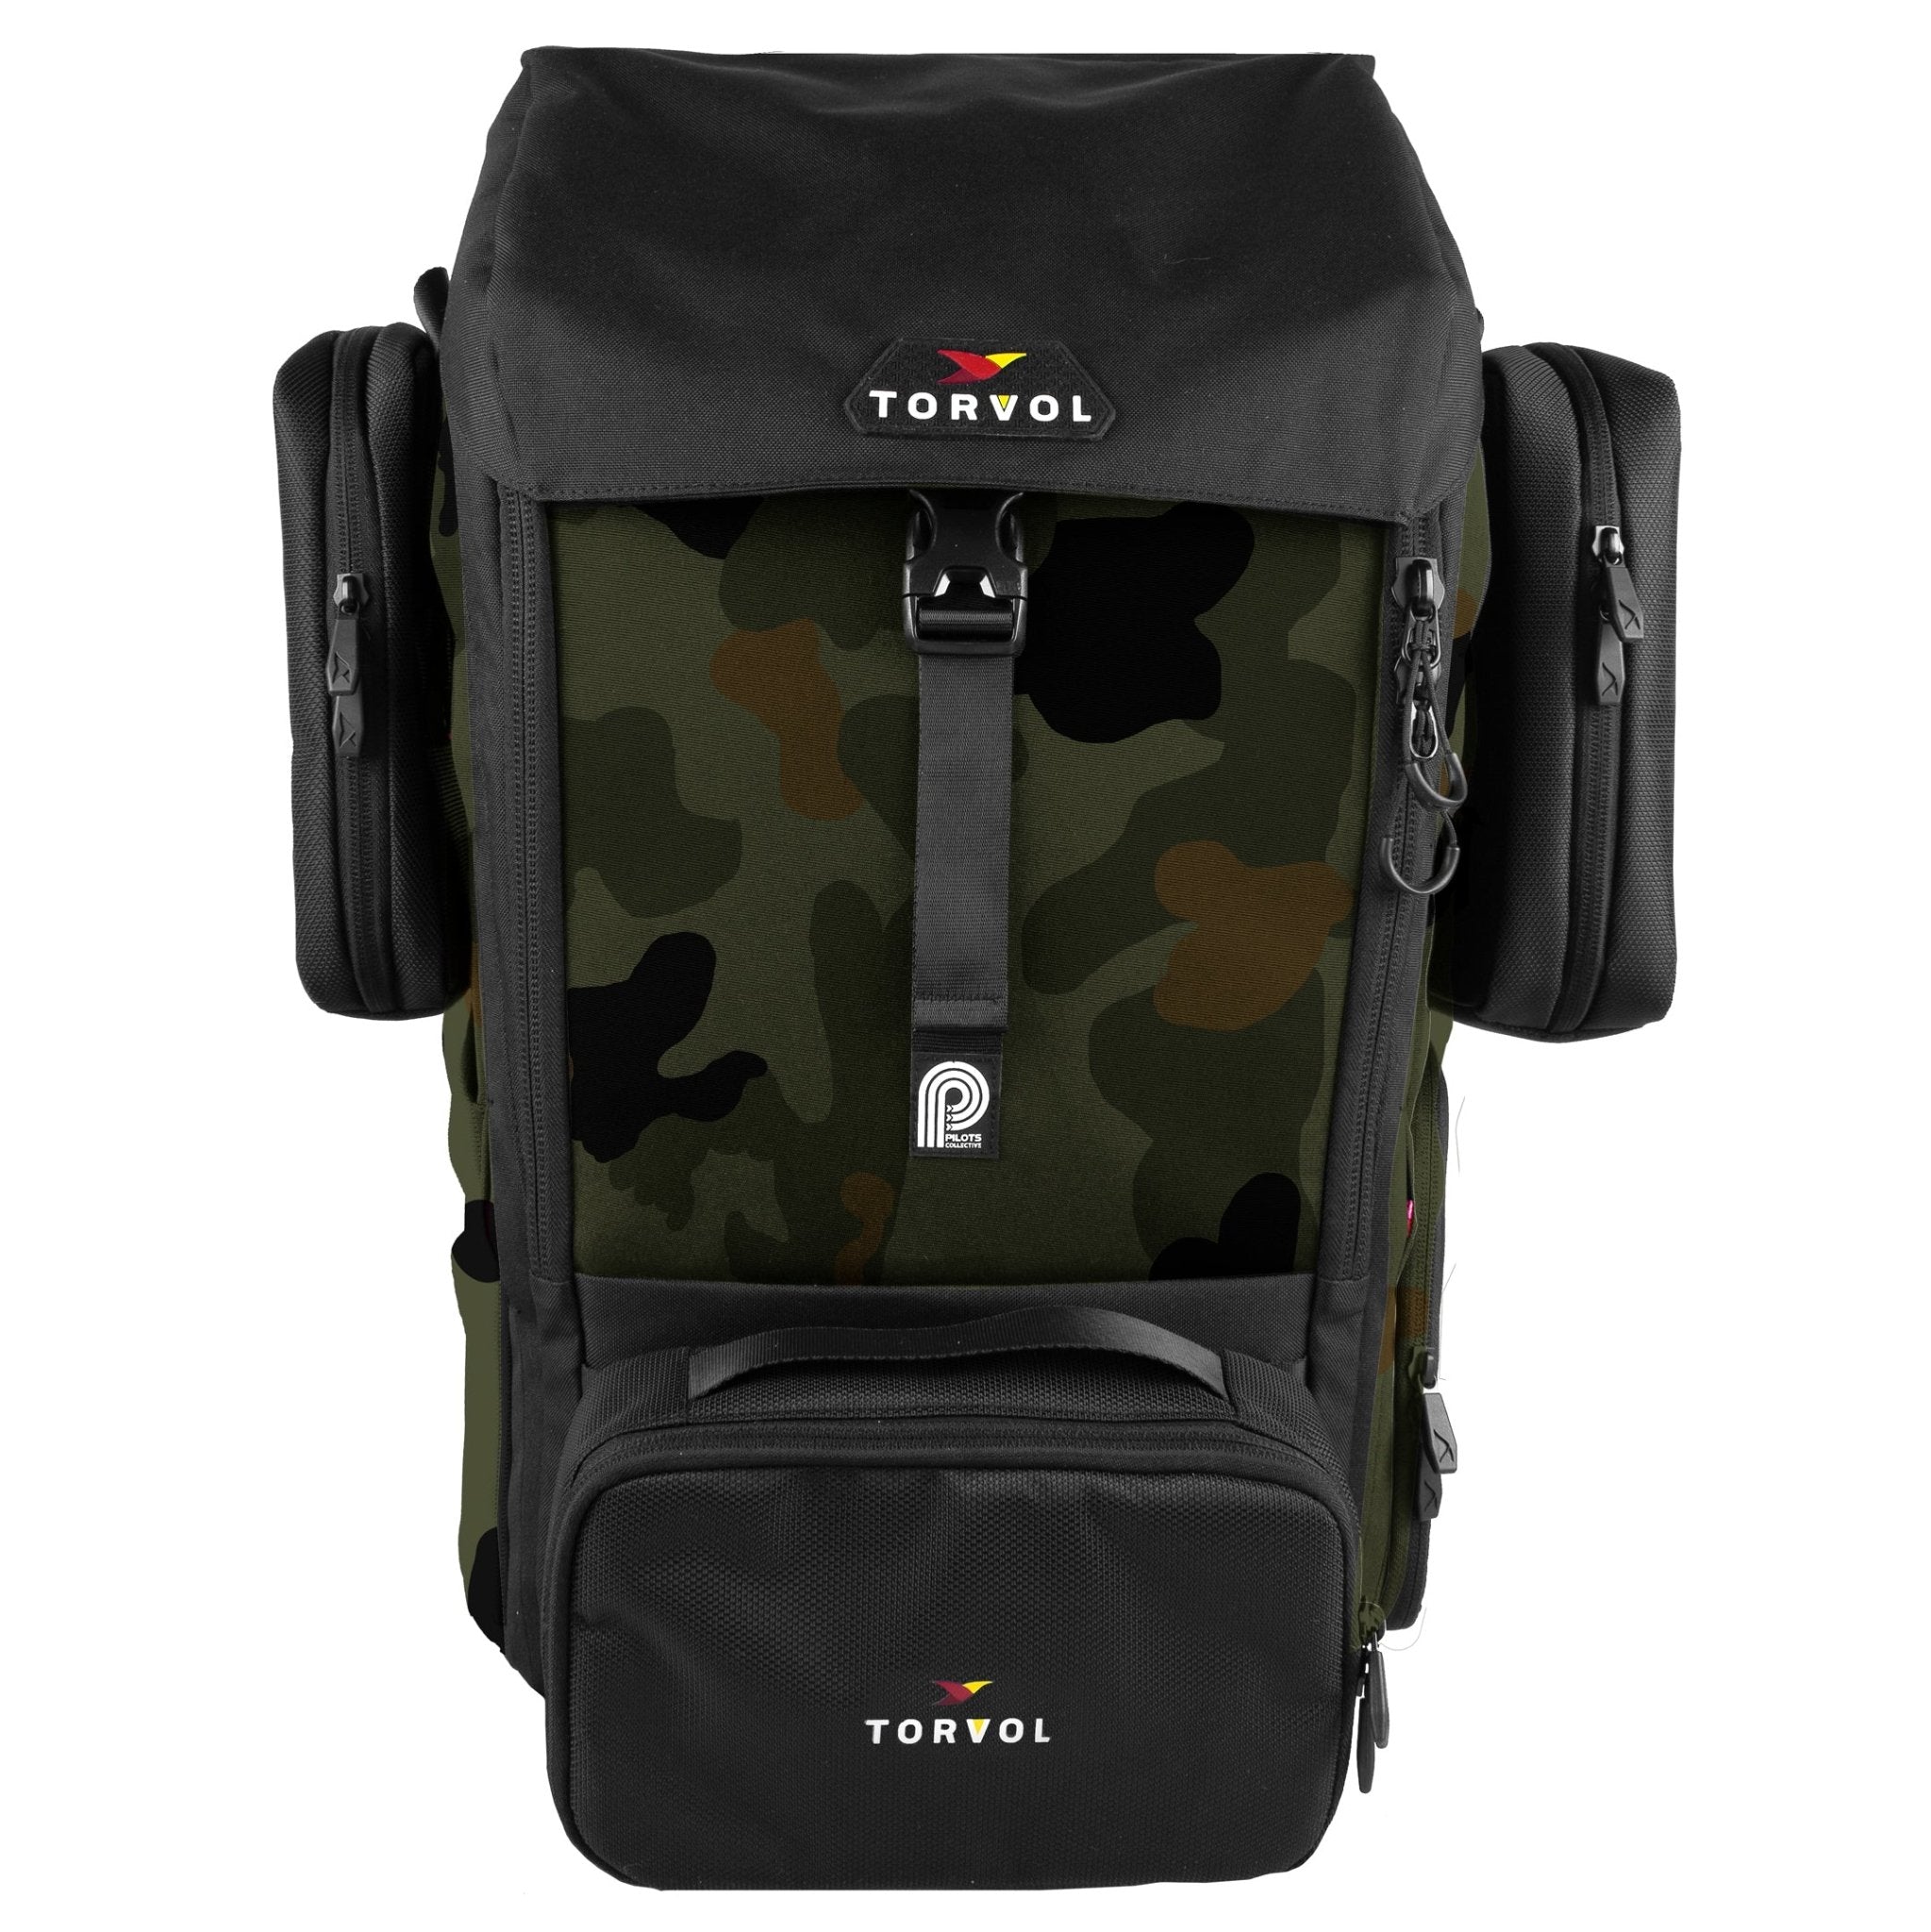 Torvol Urban Carrier Backpack - Your All-Round Freestyle Backpack 21 - Torvol - Drone Authority